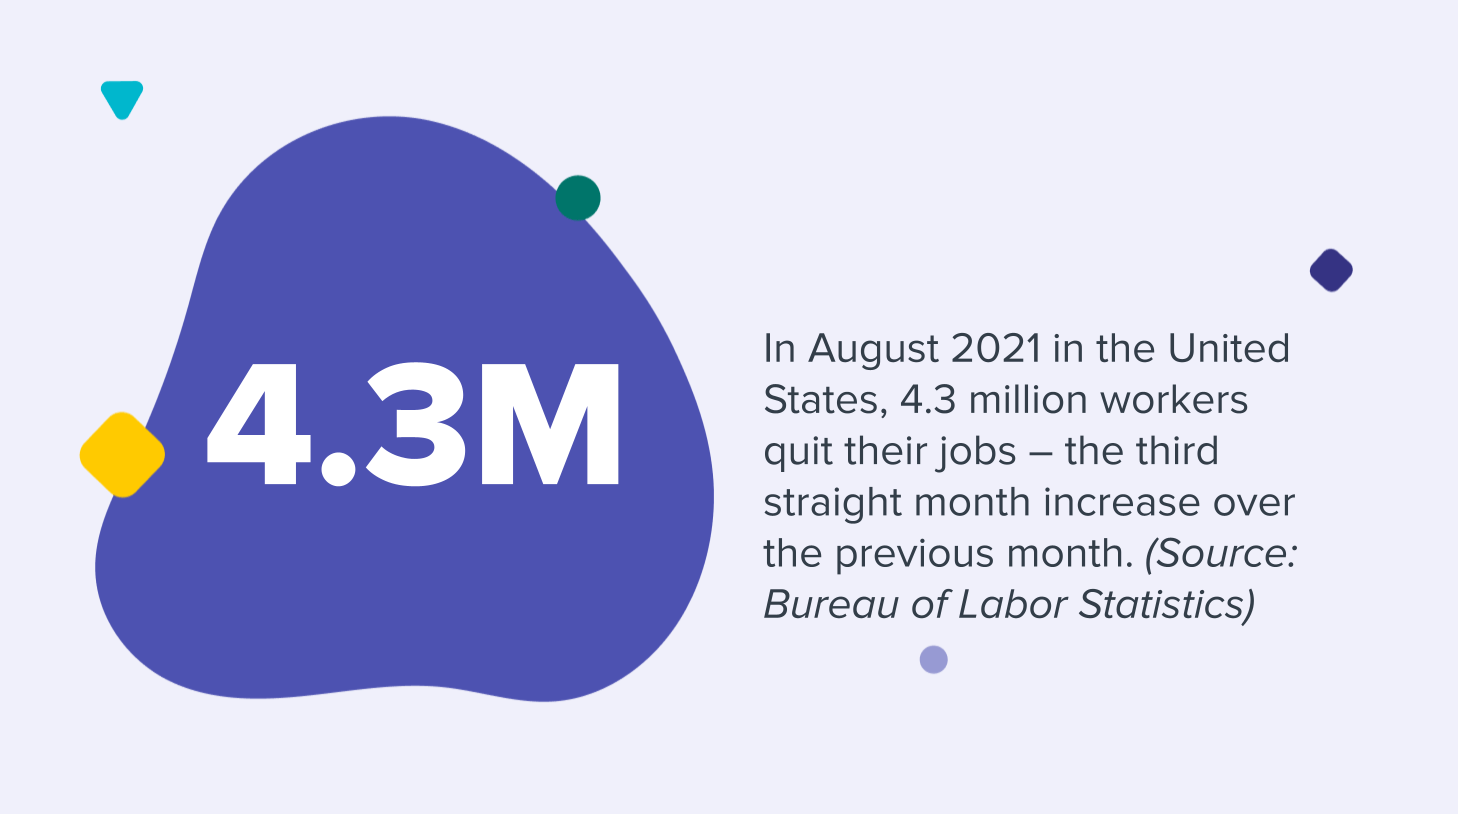 In August 2021 in the United States, 4.3 million workers quit their jobs – the third straight month increase over the previous month. (Source: Bureau of Labor Statistics)